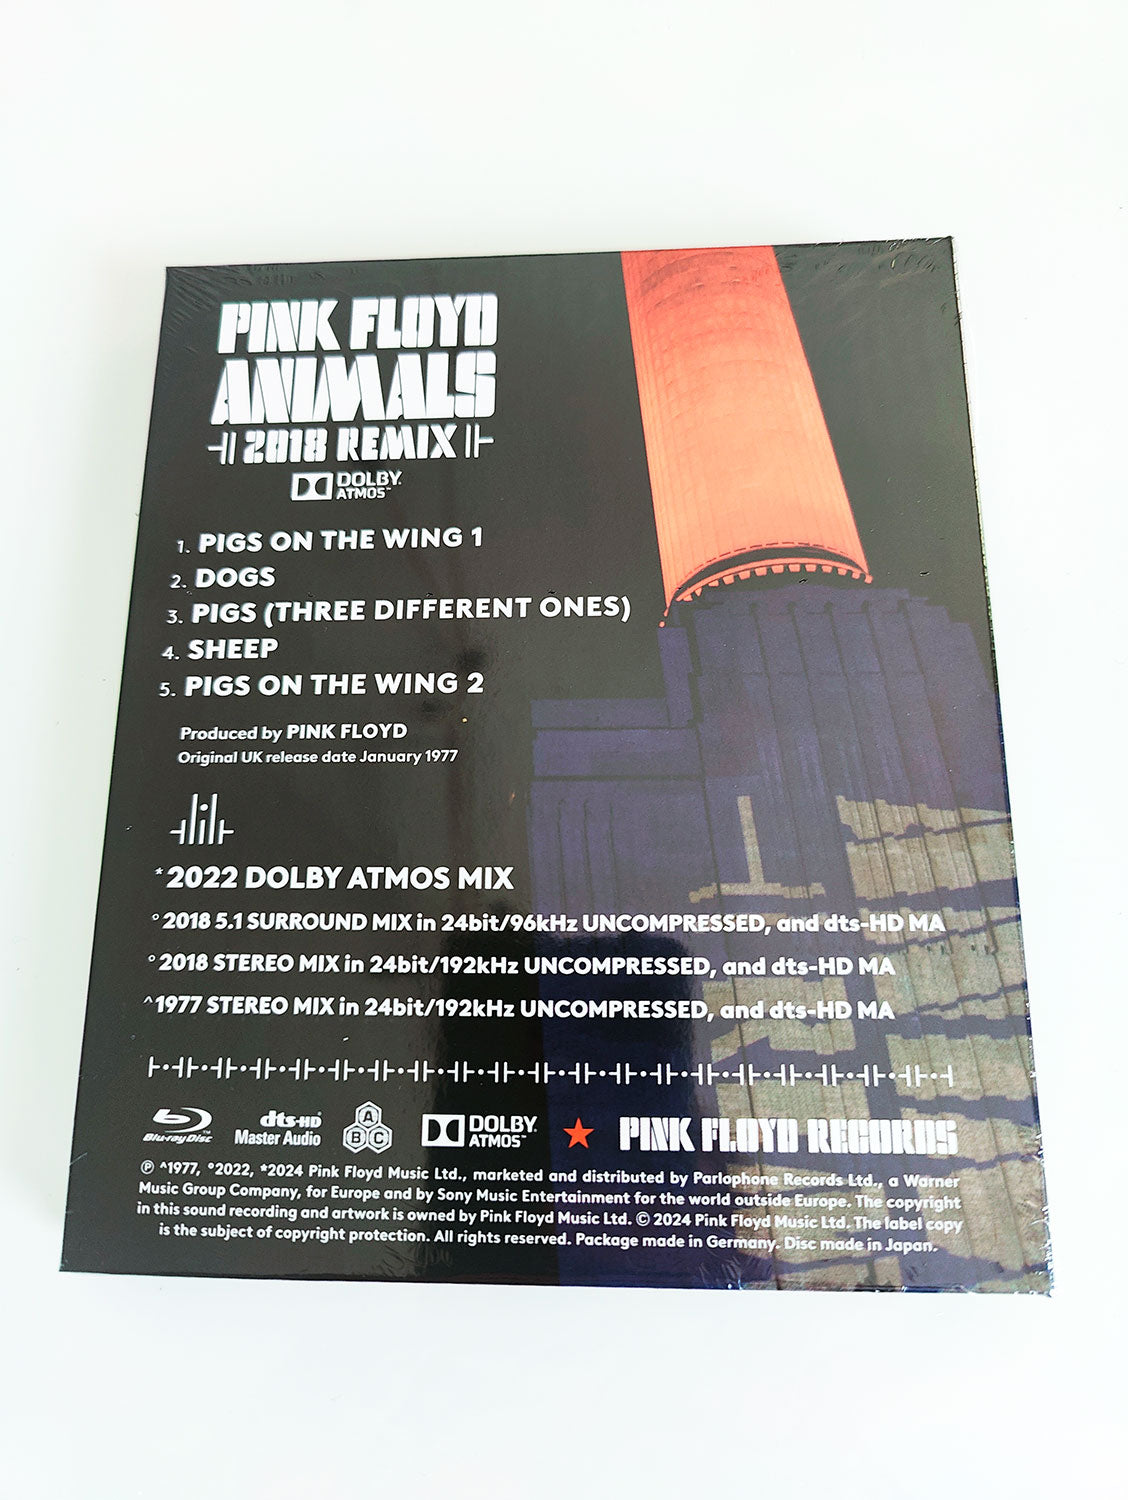 Pink Floyd / Animals blu-ray audio with Dolby Atmos Mix